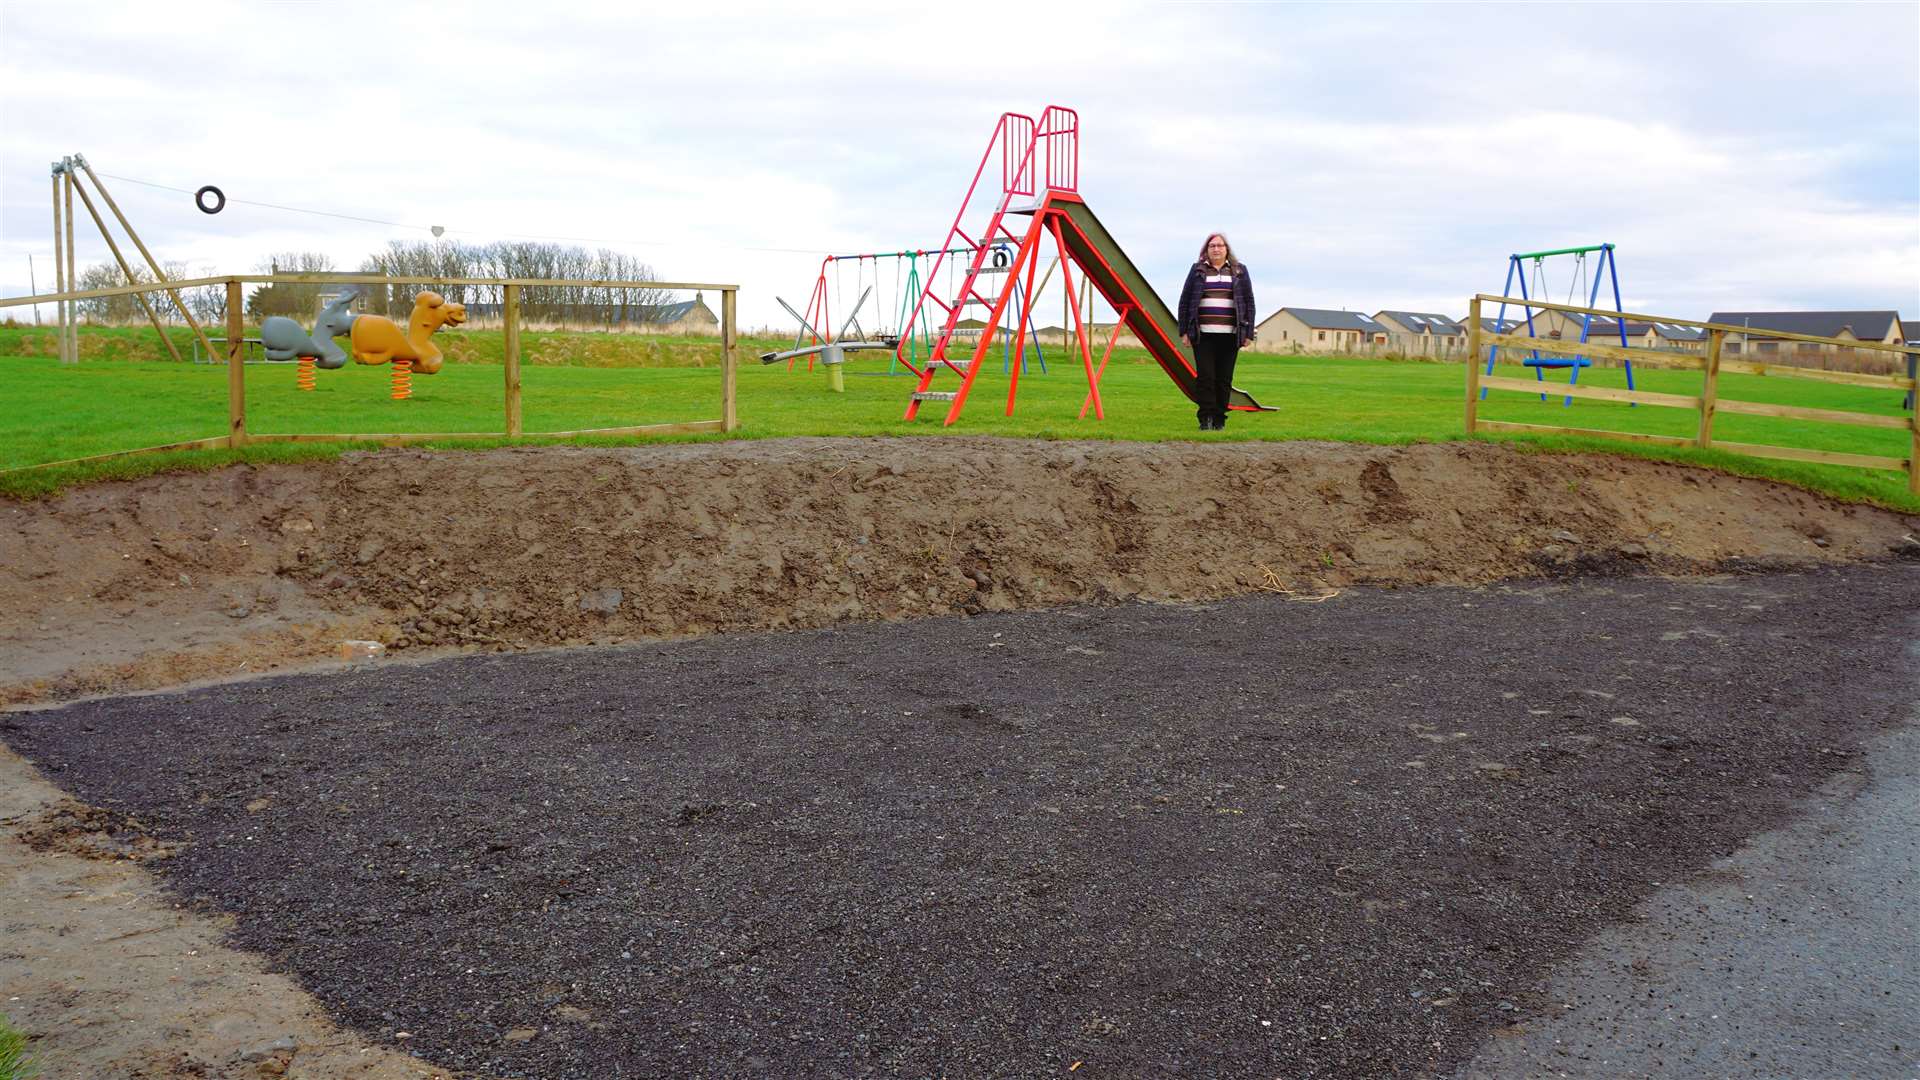 Councillor Jan McEwan believes the play slide is too close to the fence and should be erected elsewhere in the park. Picture: DGS